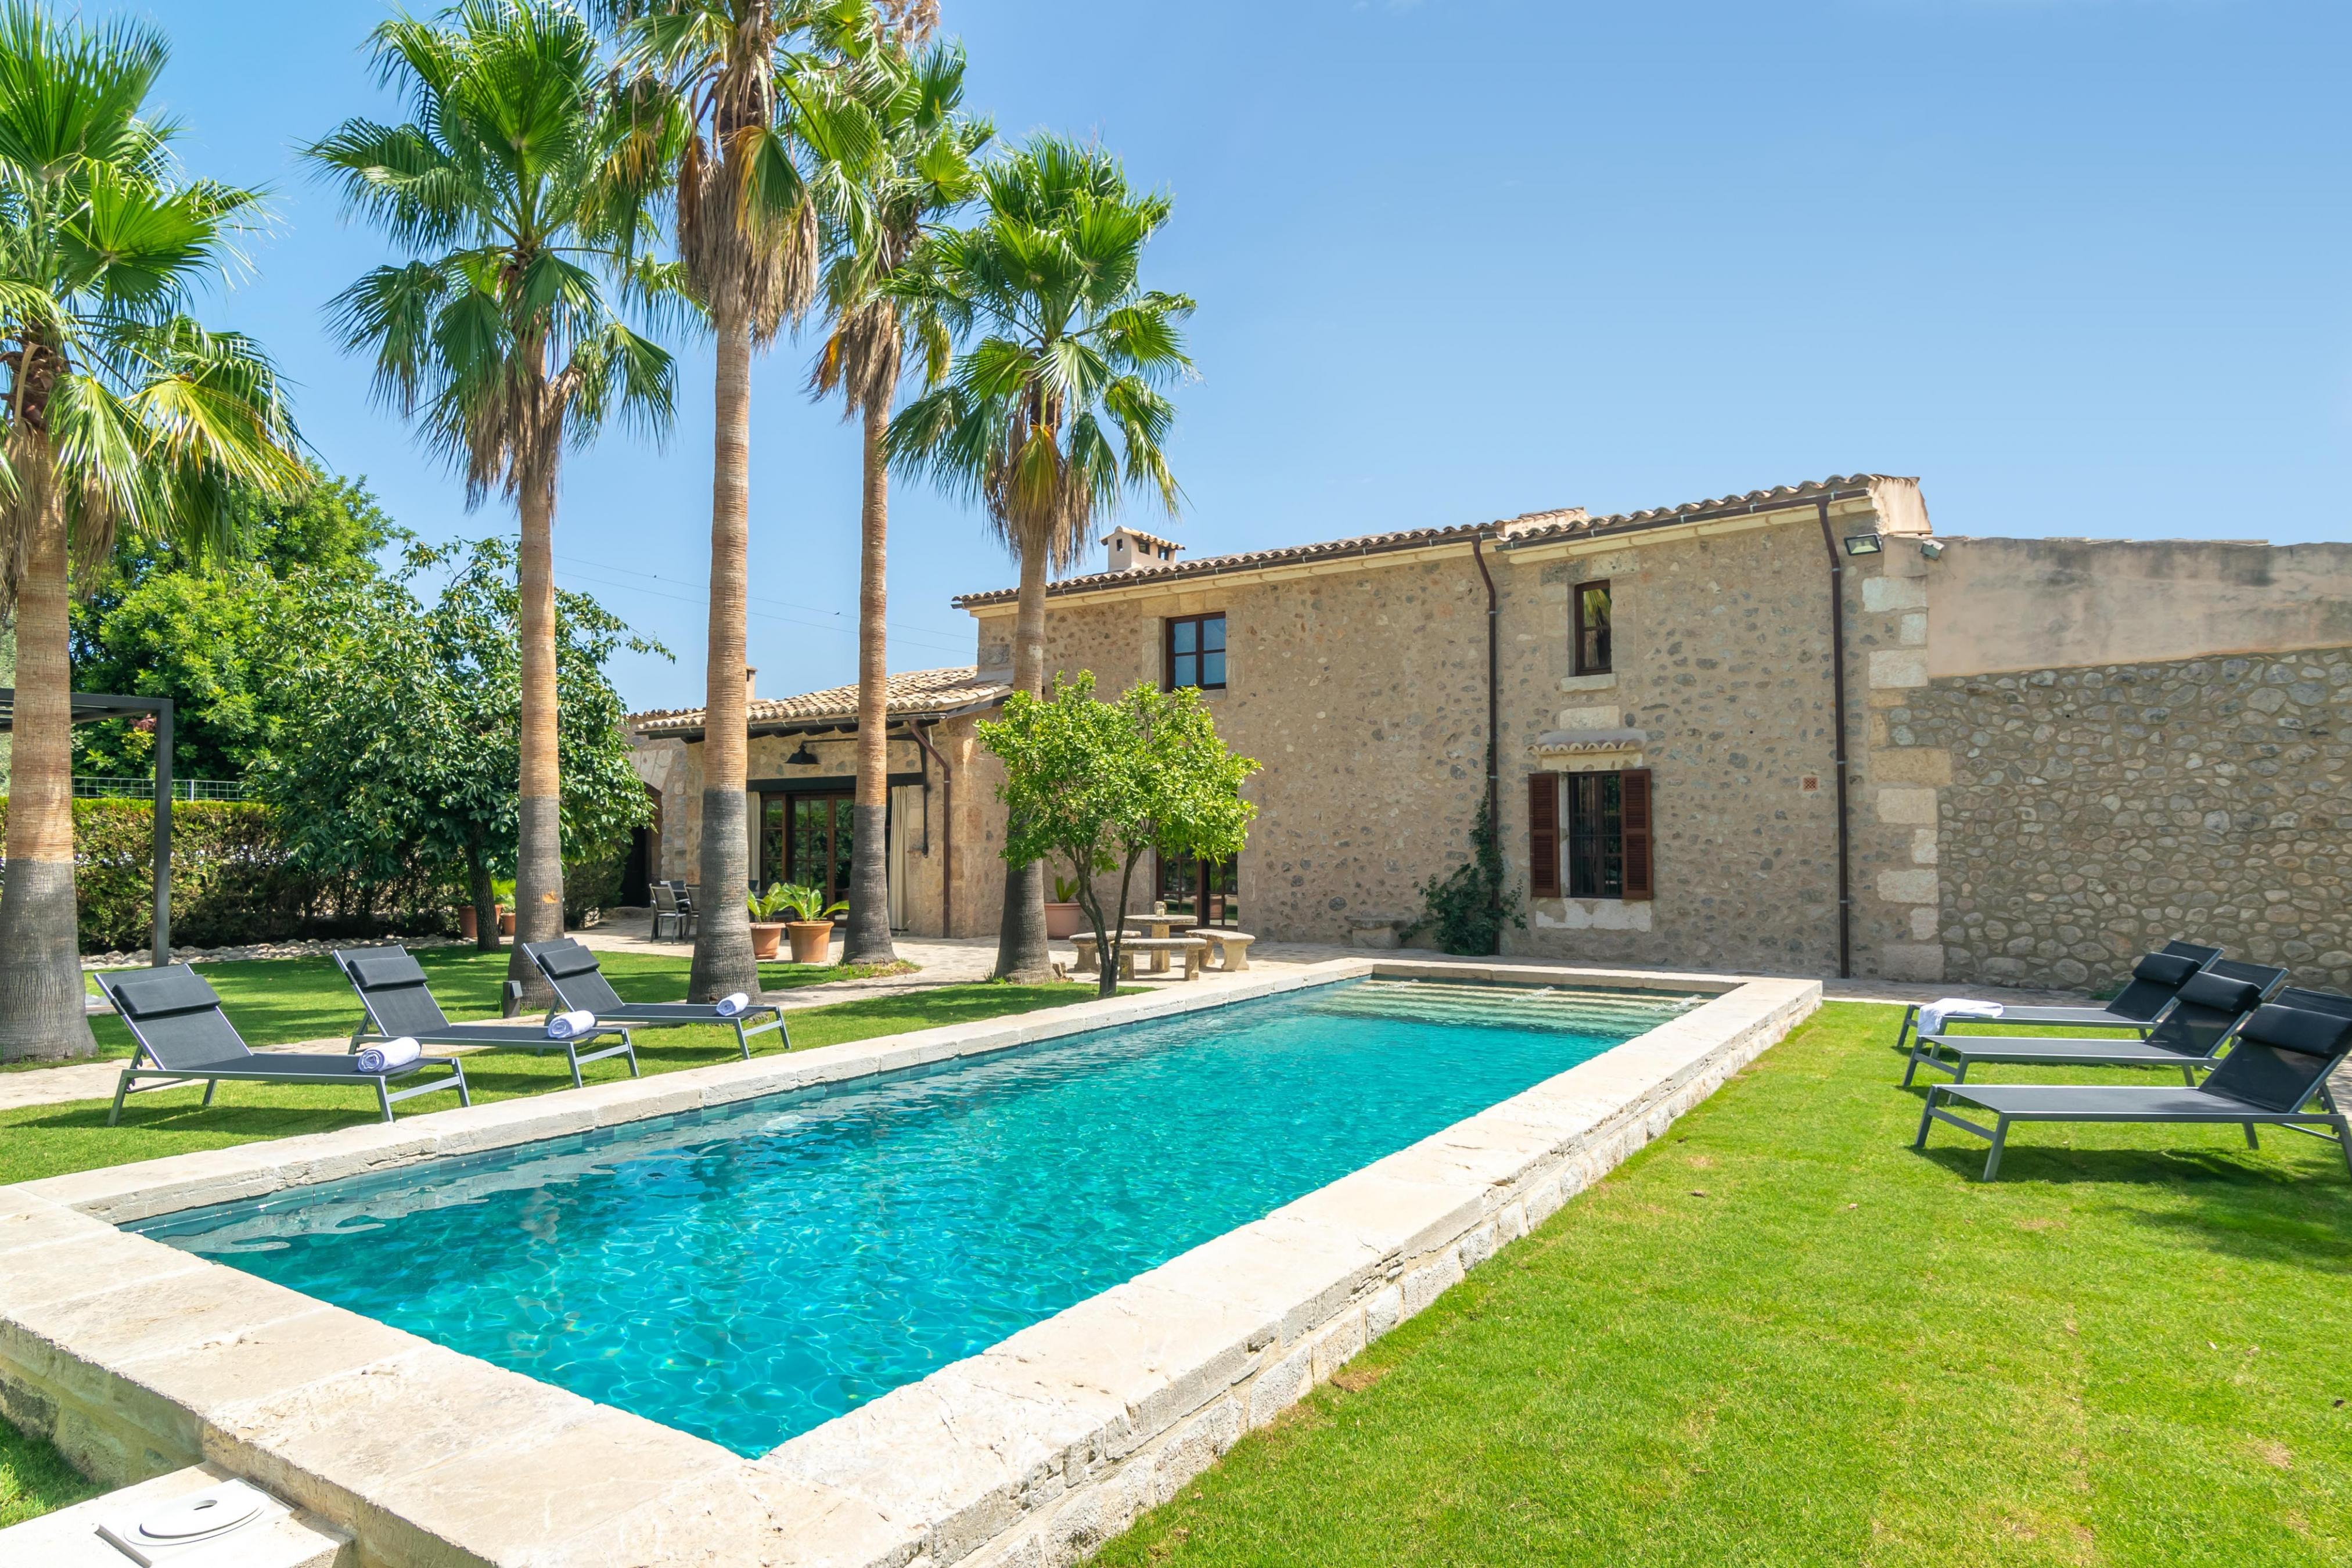 Property Image 1 - S’HORT DES CAPELLA VERONA - Traditional Majorcan house  in a beautiful natural environment Free WiFi